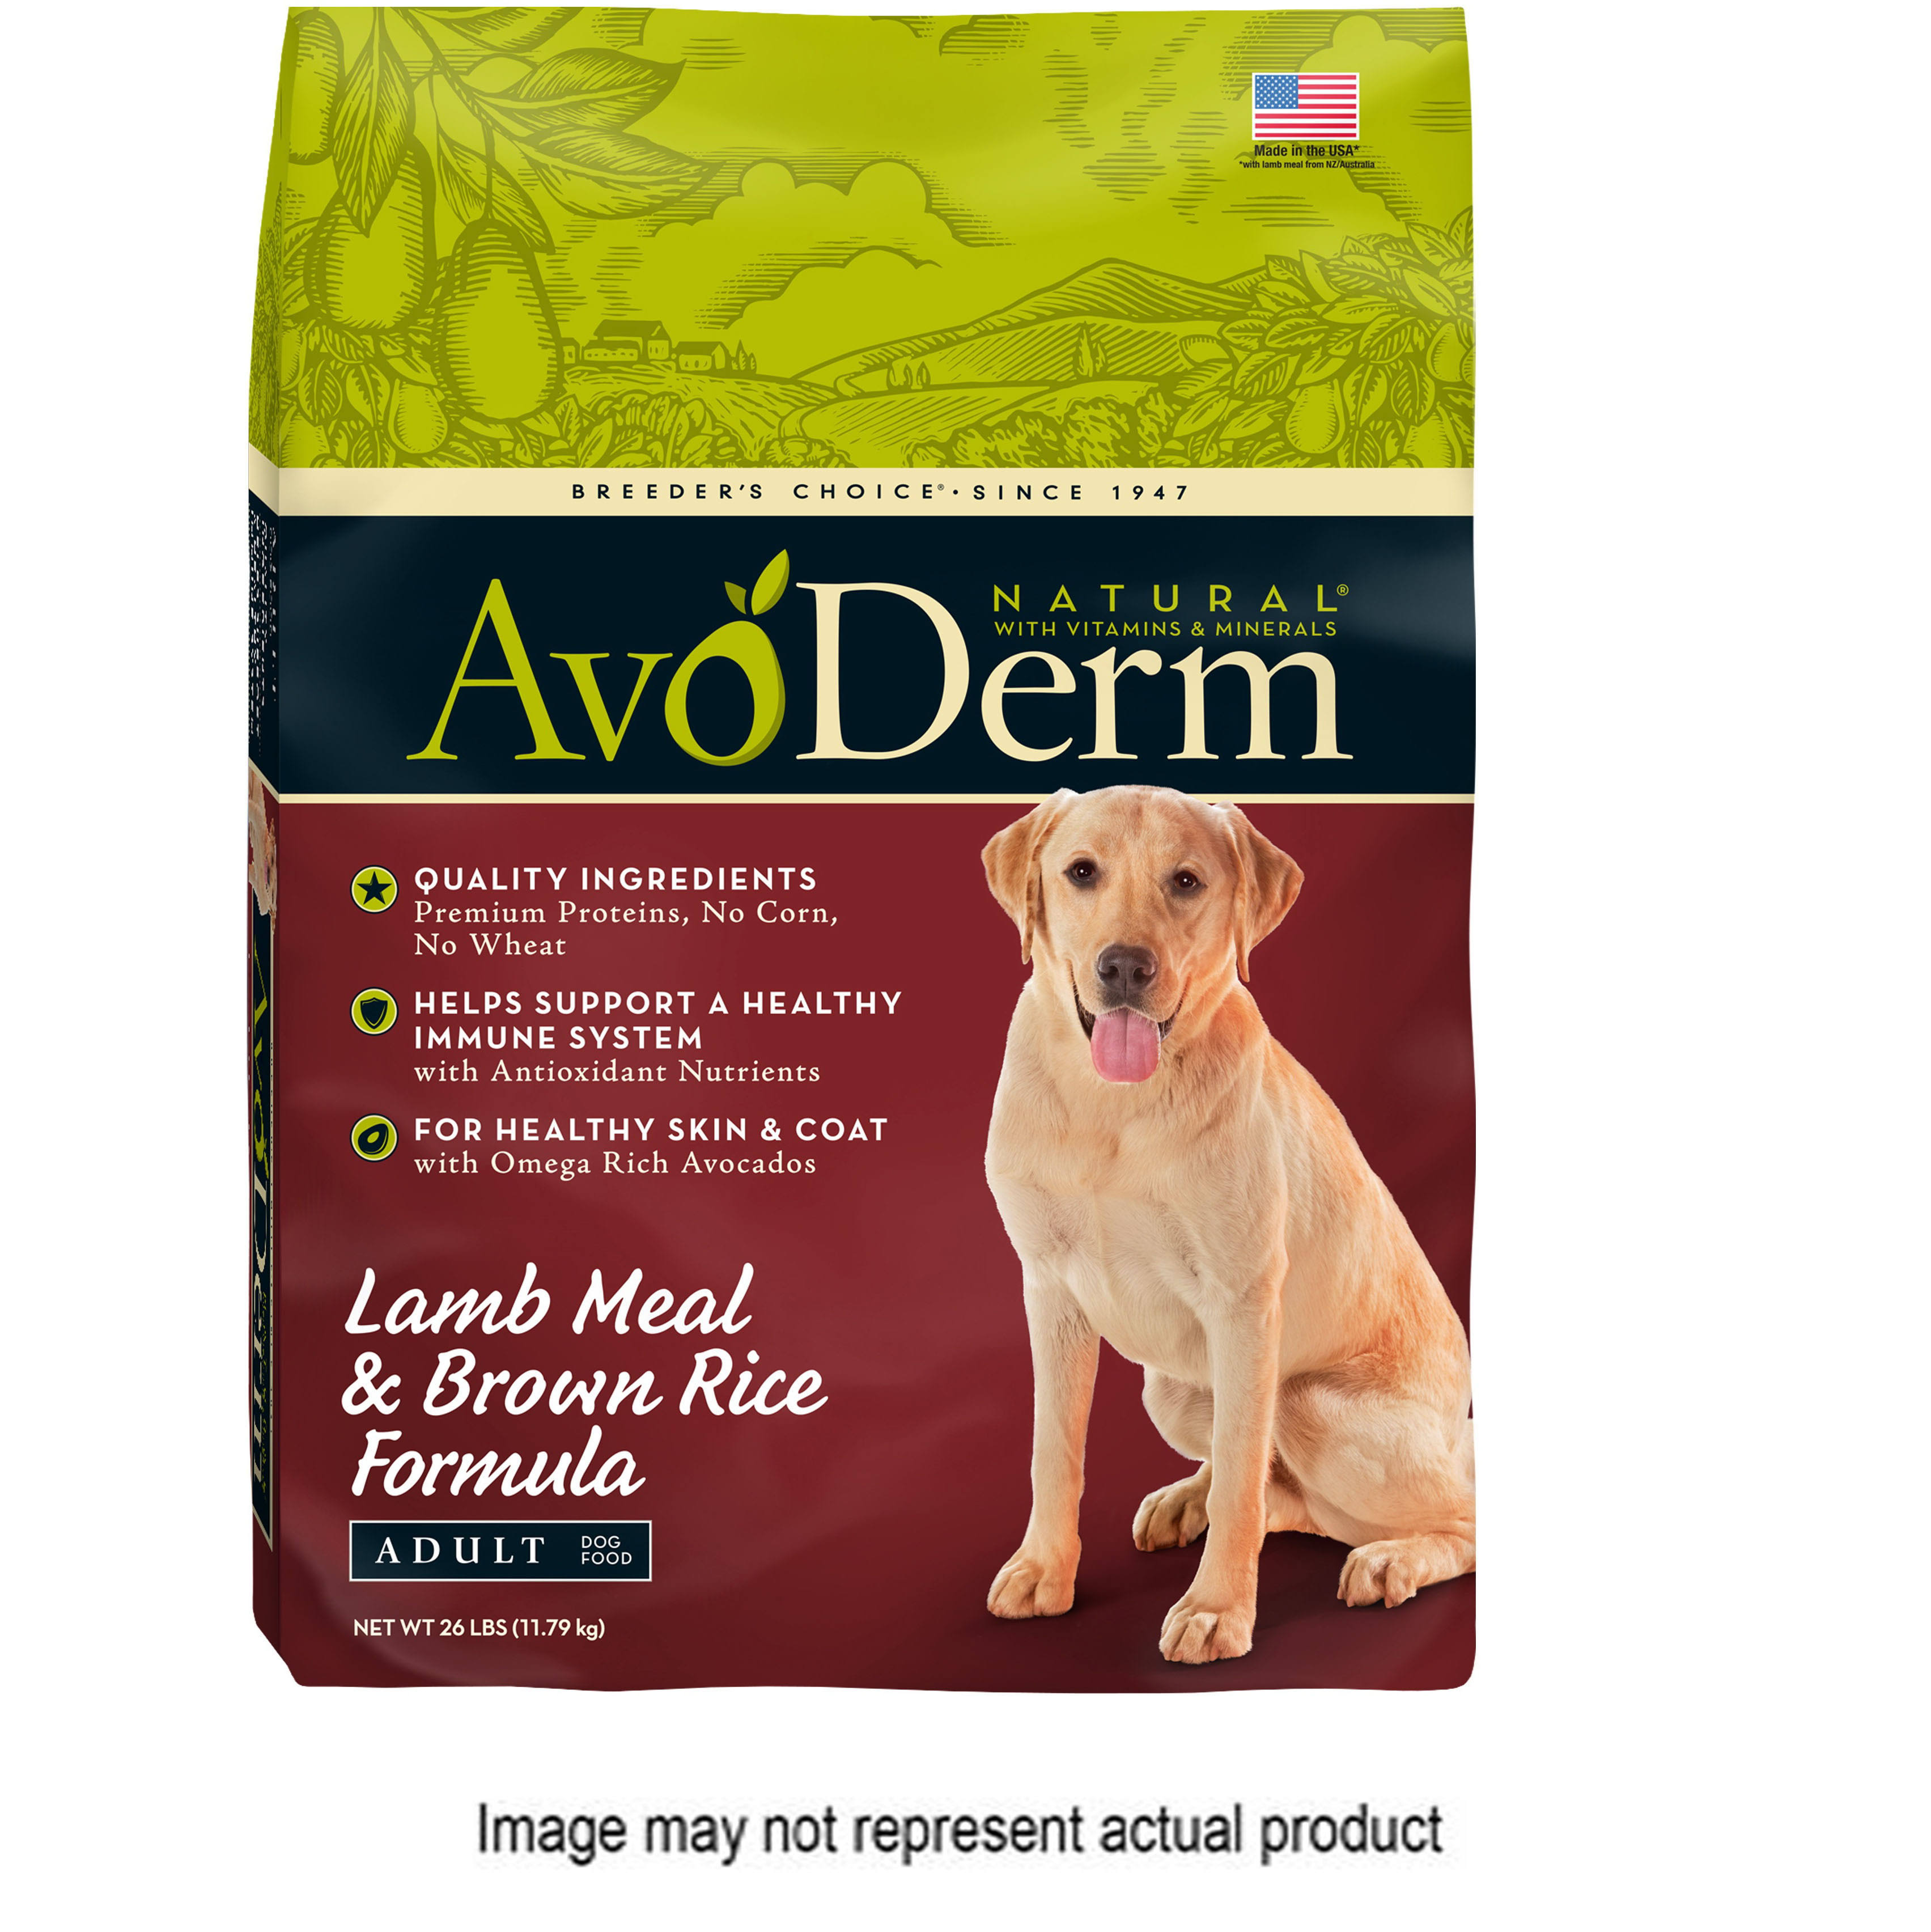 Avo Derm Dry Dog Food - Lamb Meal and Brown Rice, 26lbs